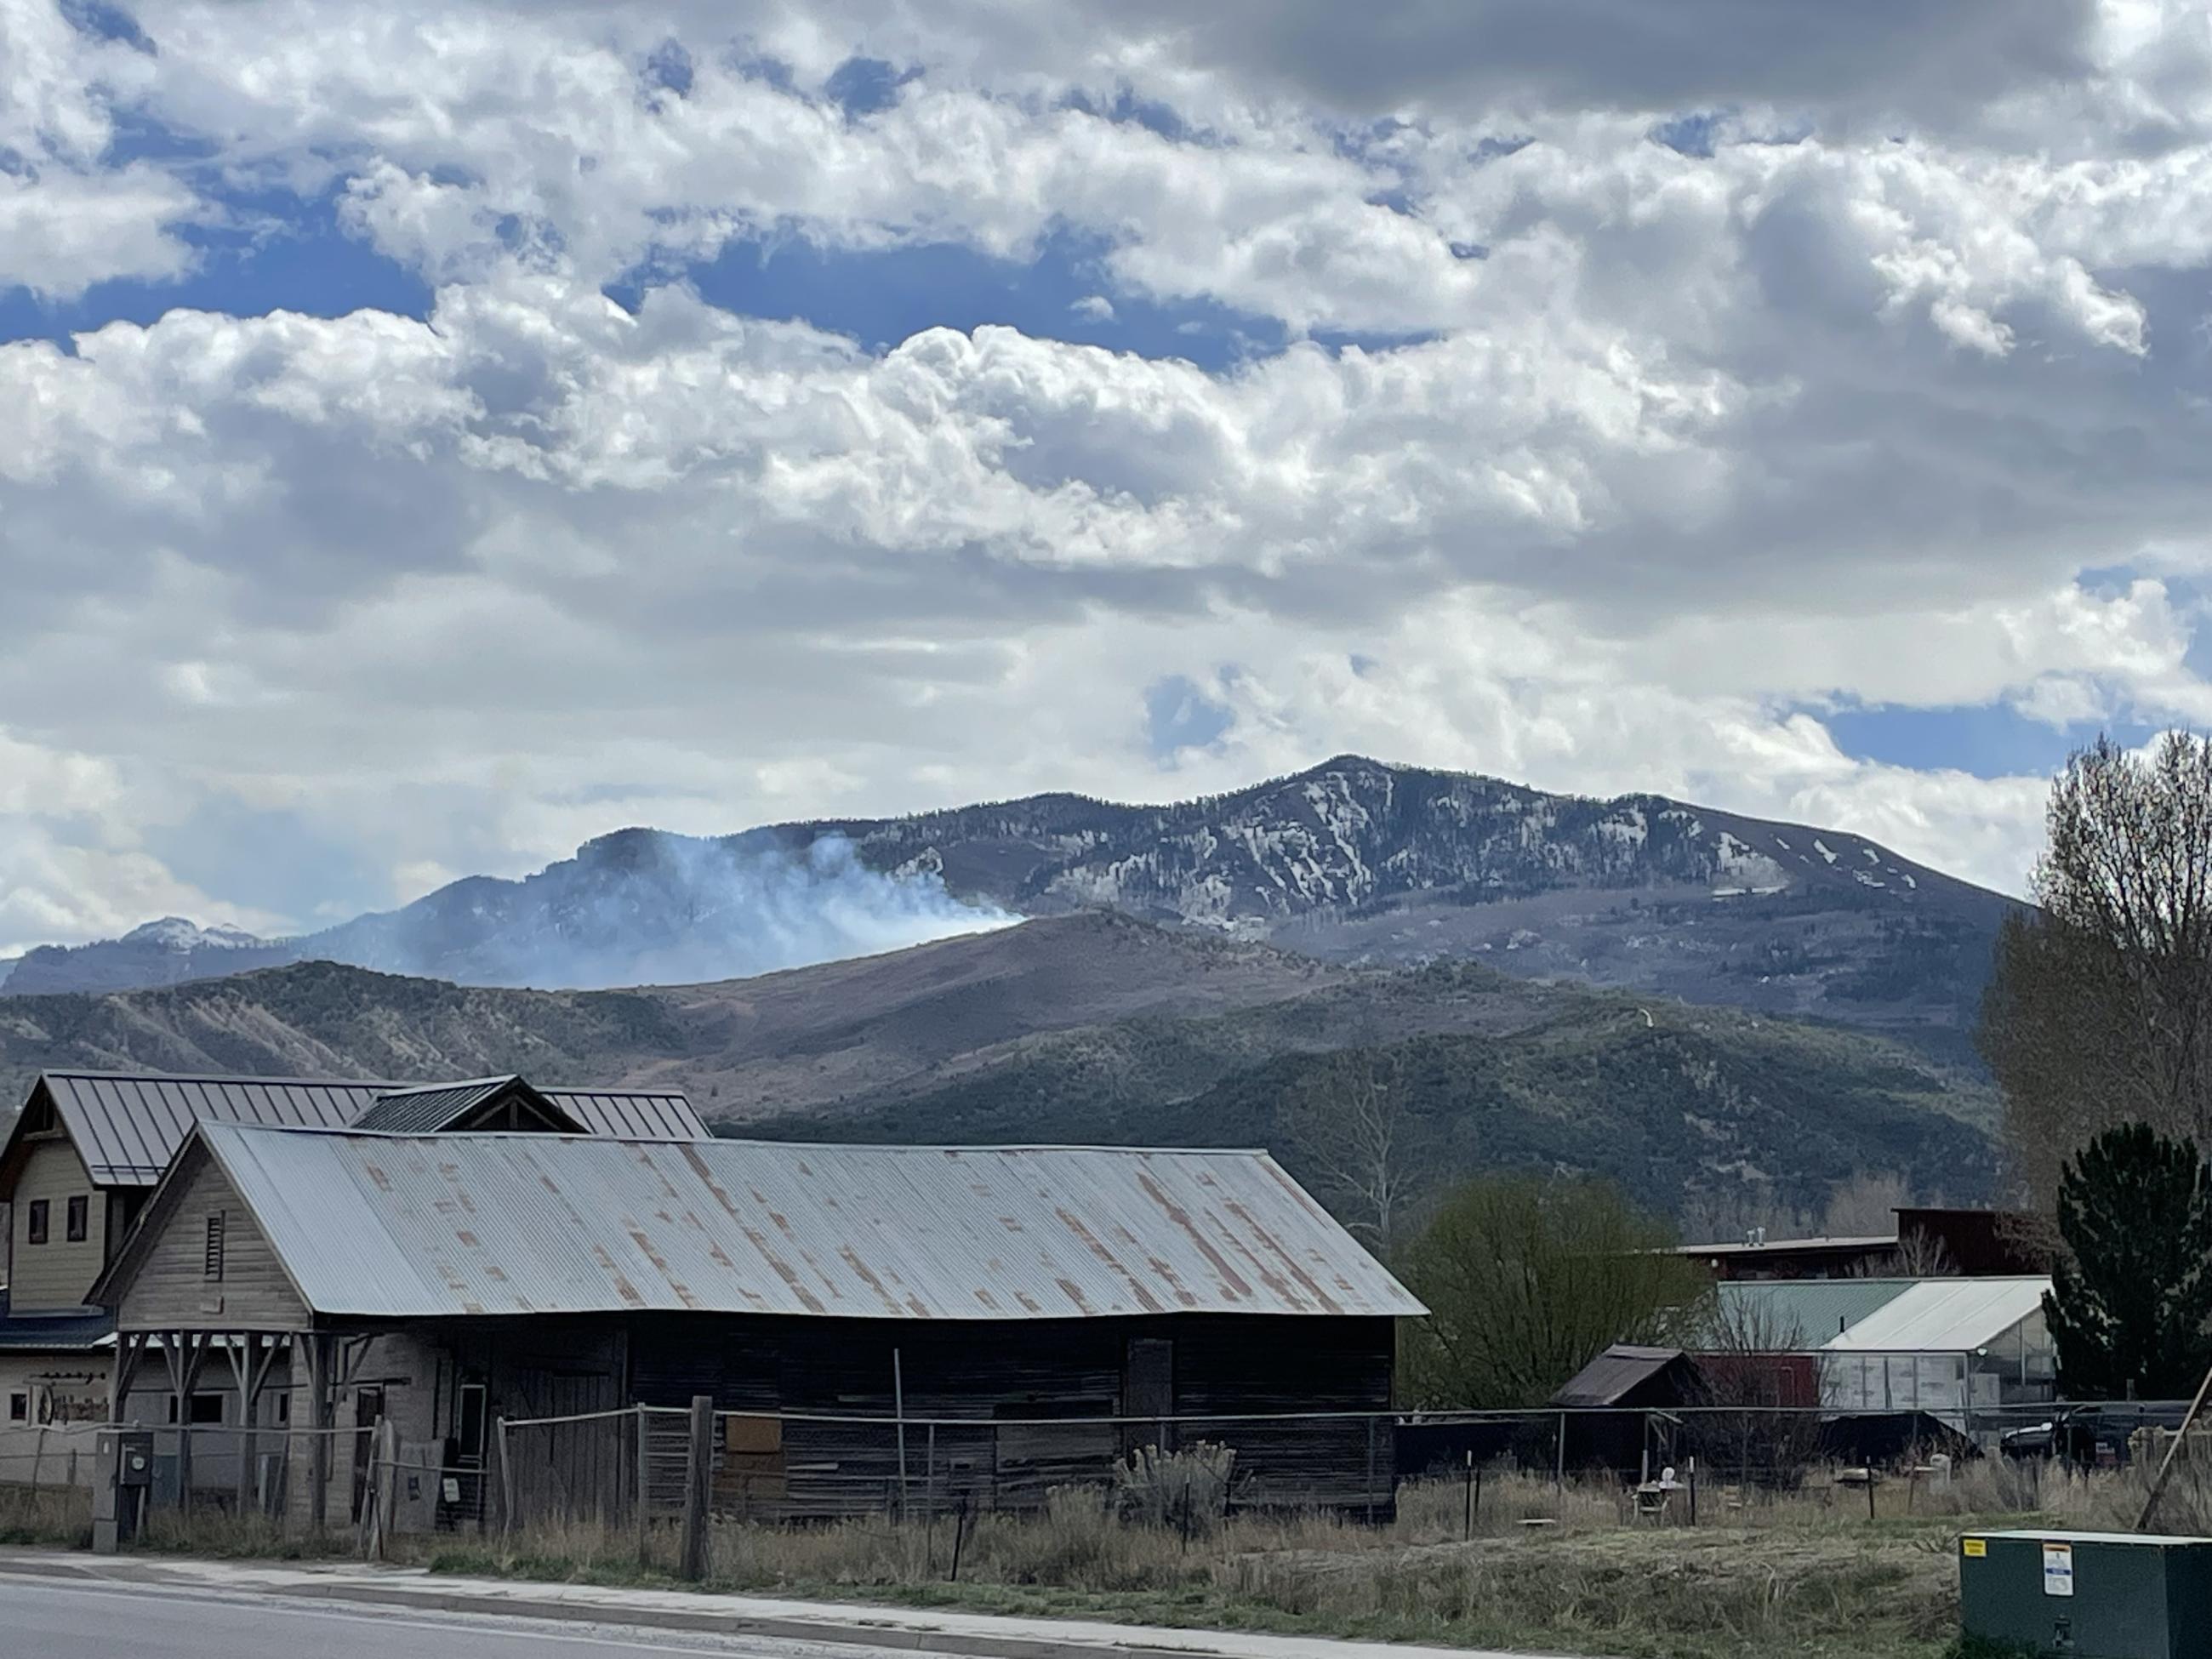 Photo shows a historic building, wood with metal roof, with mountains in the background and smoke emerging from the mountains